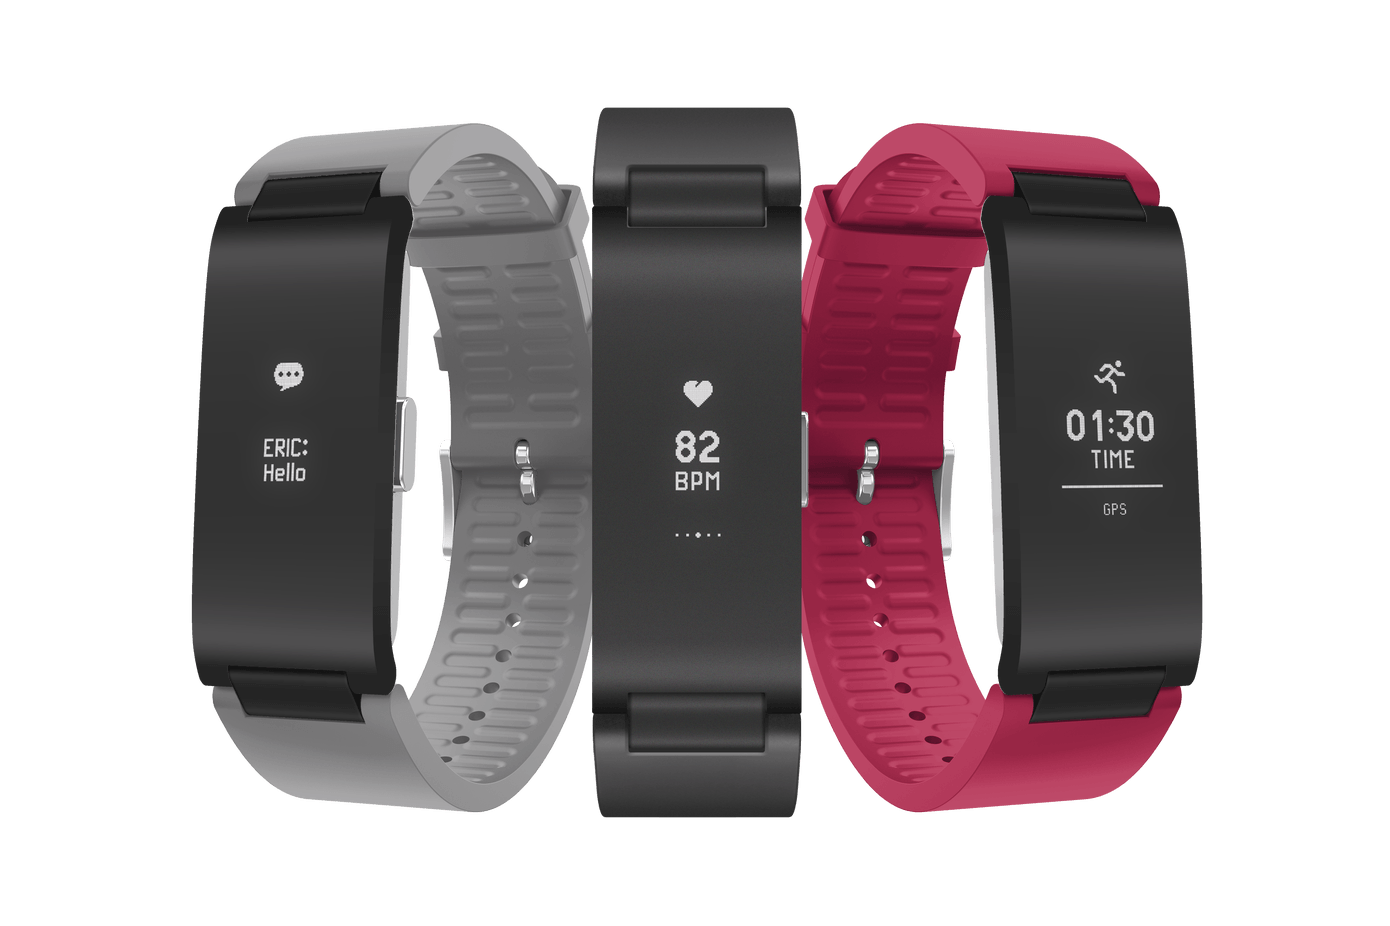 Withings Pulse HR 7